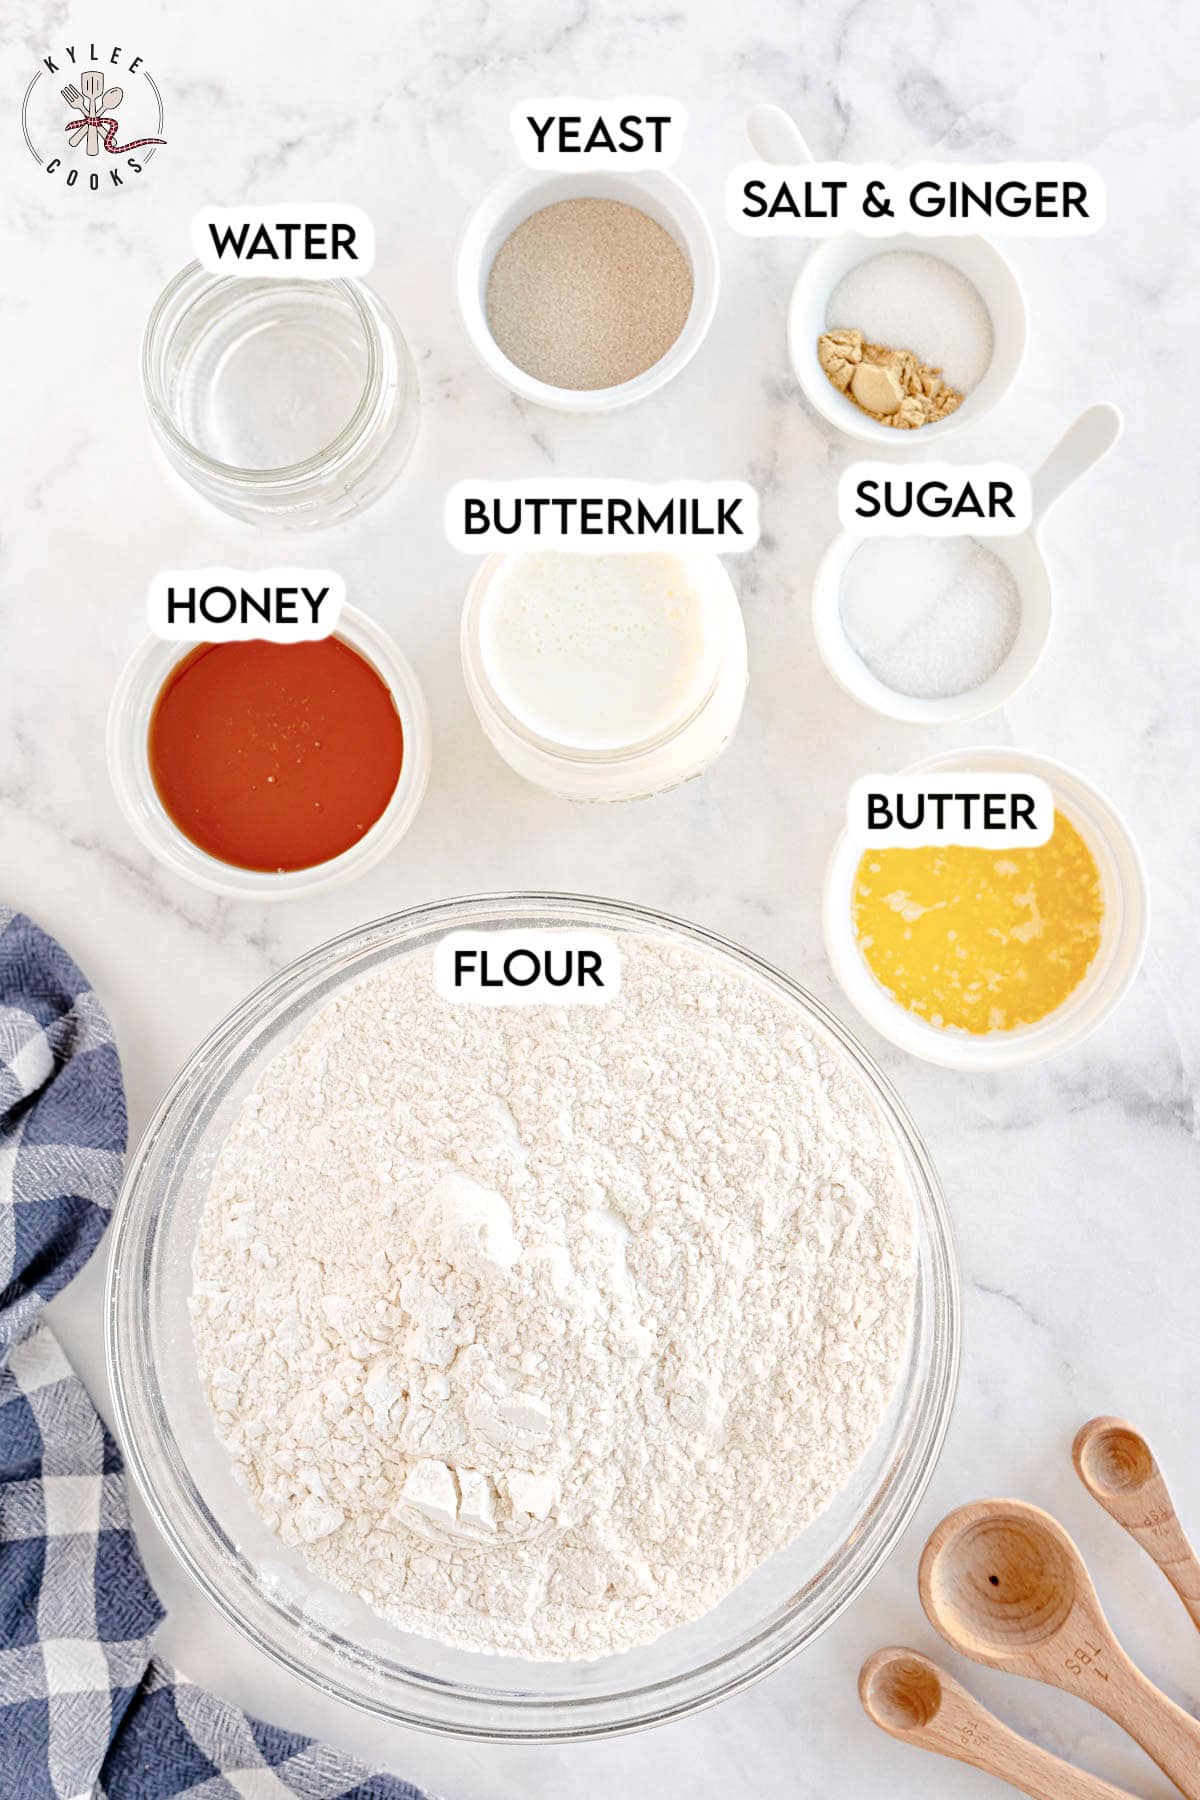 A collection of labeled ingredients, perfect for your next sandwich bread project, including flour, buttermilk, yeast, salt and ginger, sugar, butter, honey, and water placed in bowls and jars on a white surface.